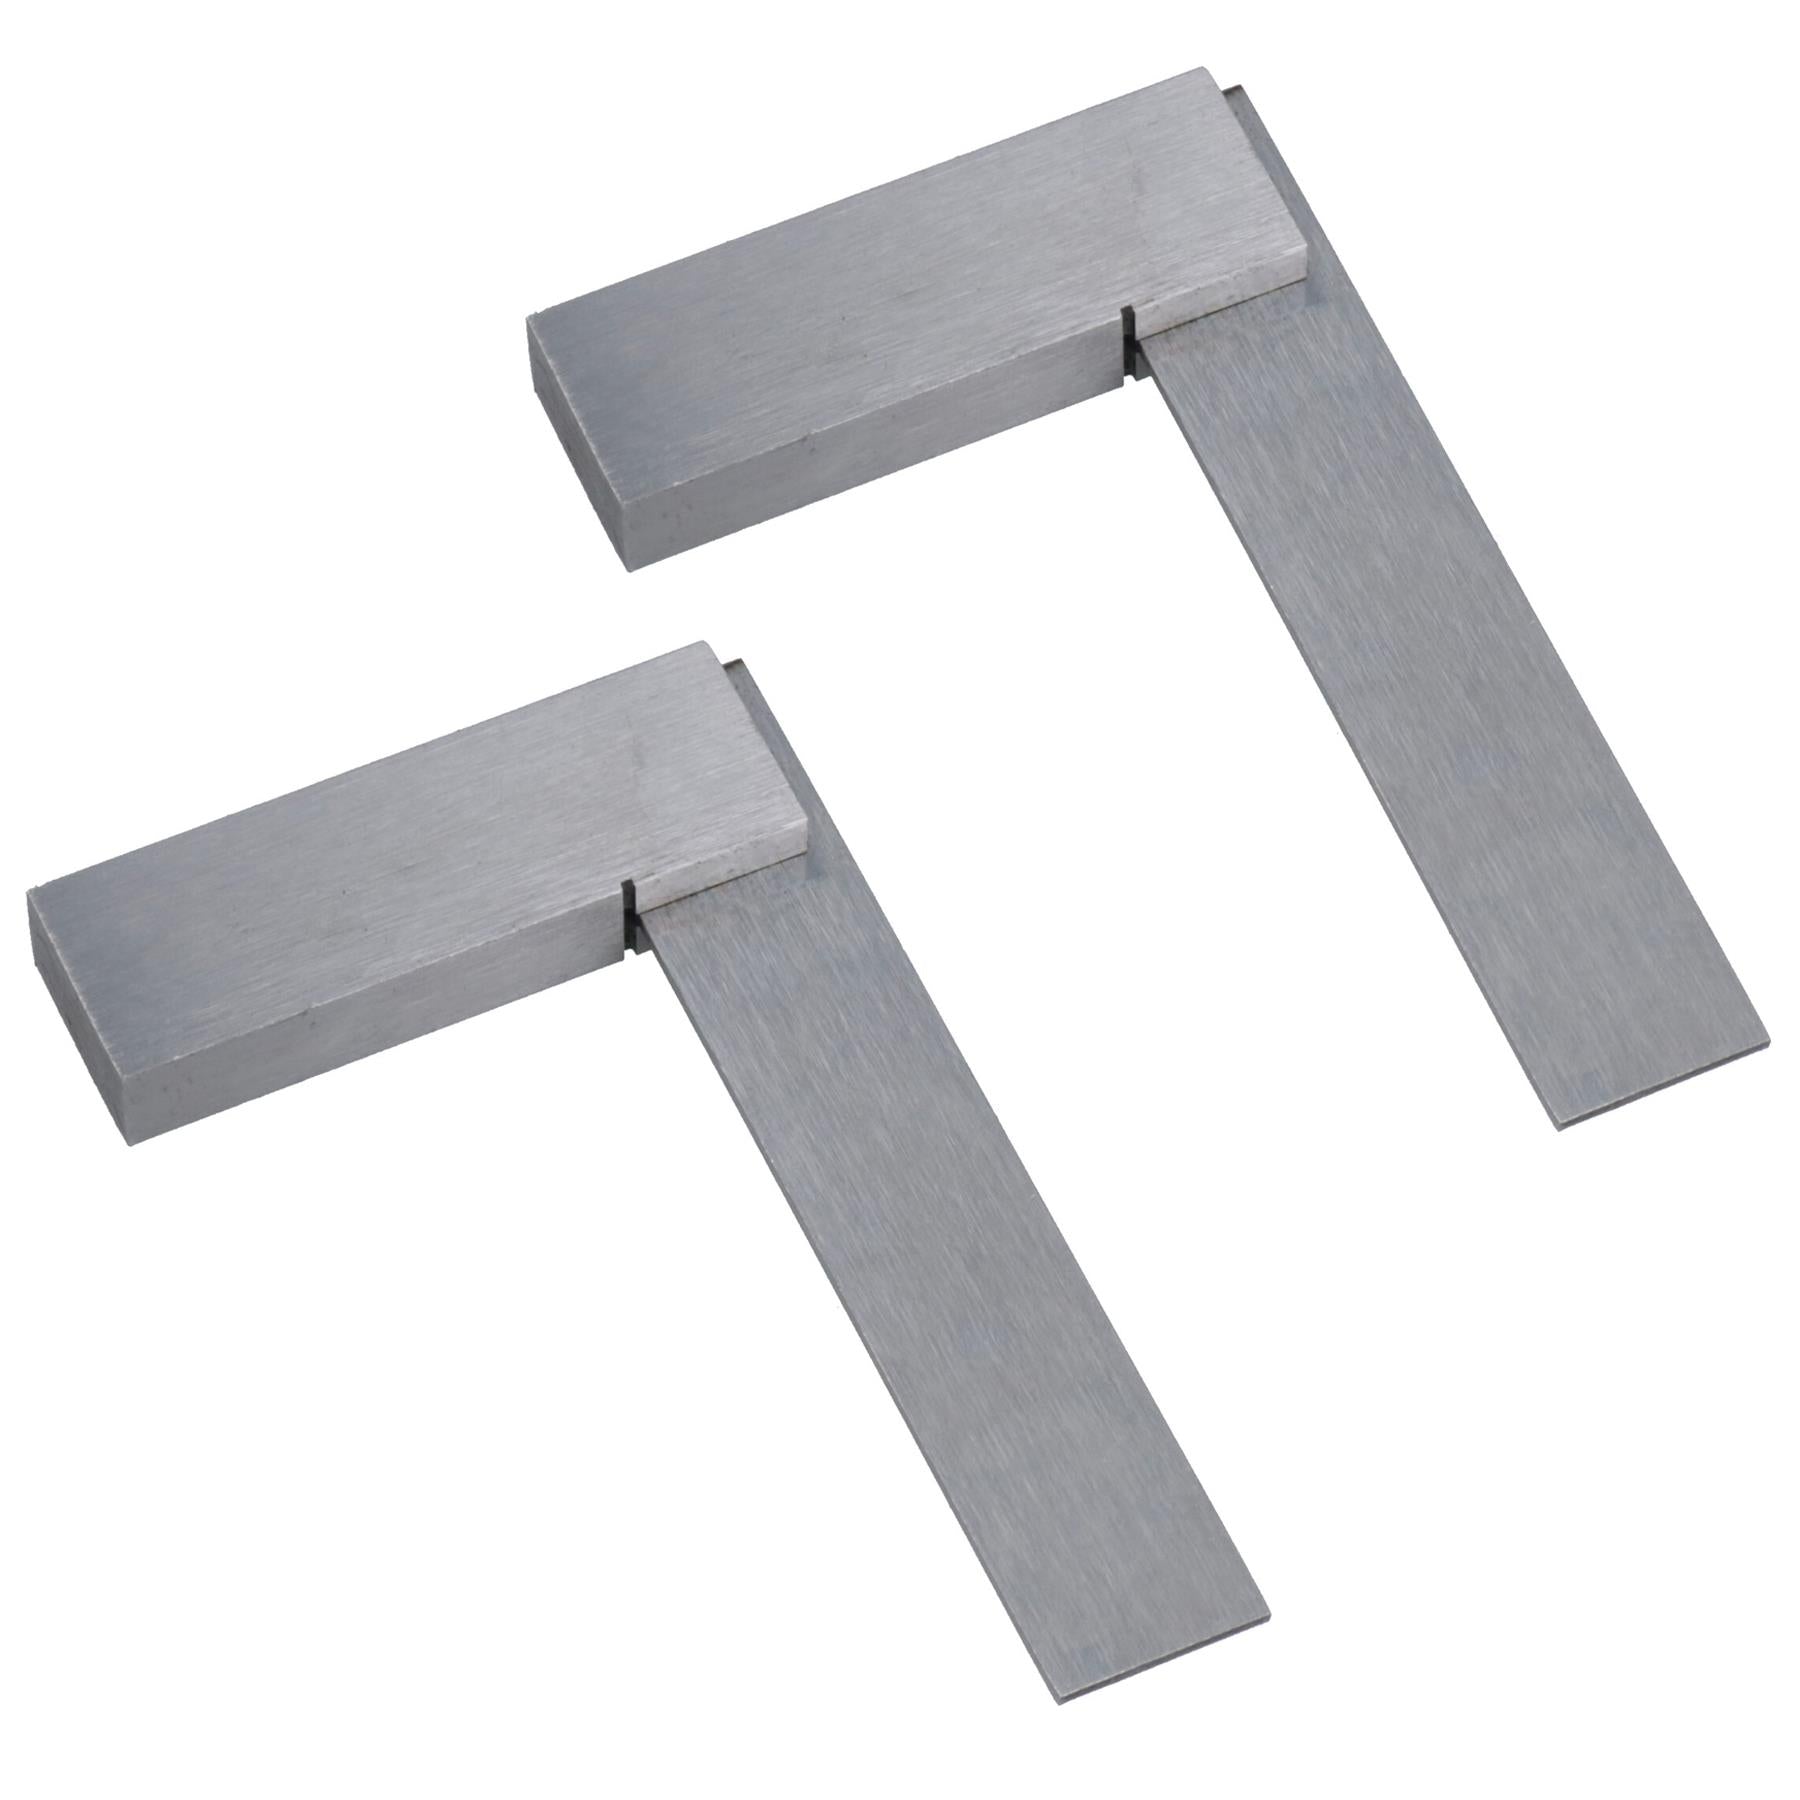 3” 75mm Engineer Tri Set Square Right Angle Straight Edge Stainless Steel